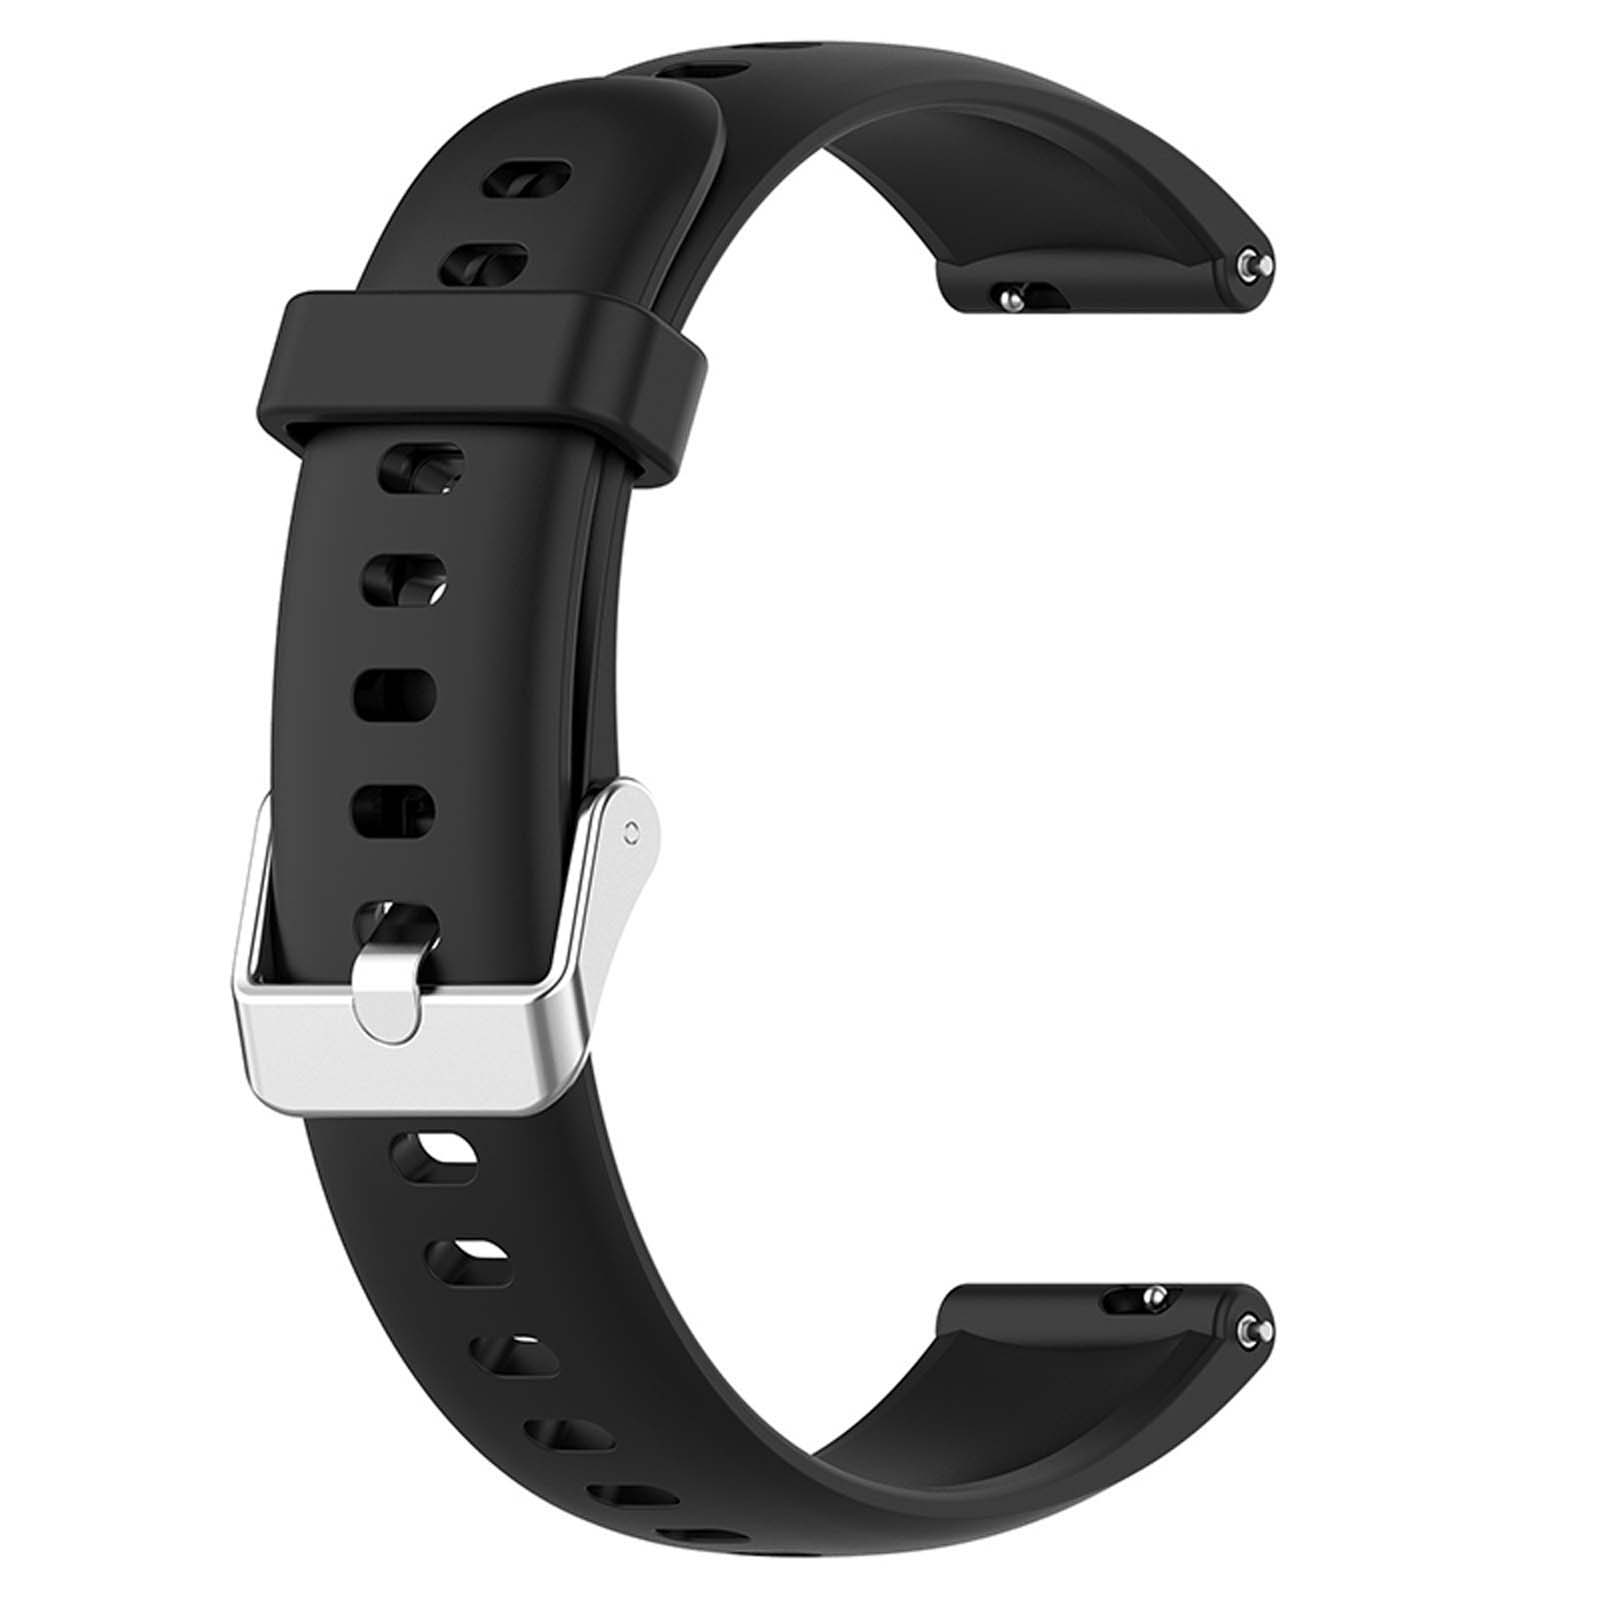 Silicone Smart Watch Strap Band Waterproof Sweatproof Sport Bracelet Accessories Compatible For Keep B4 black